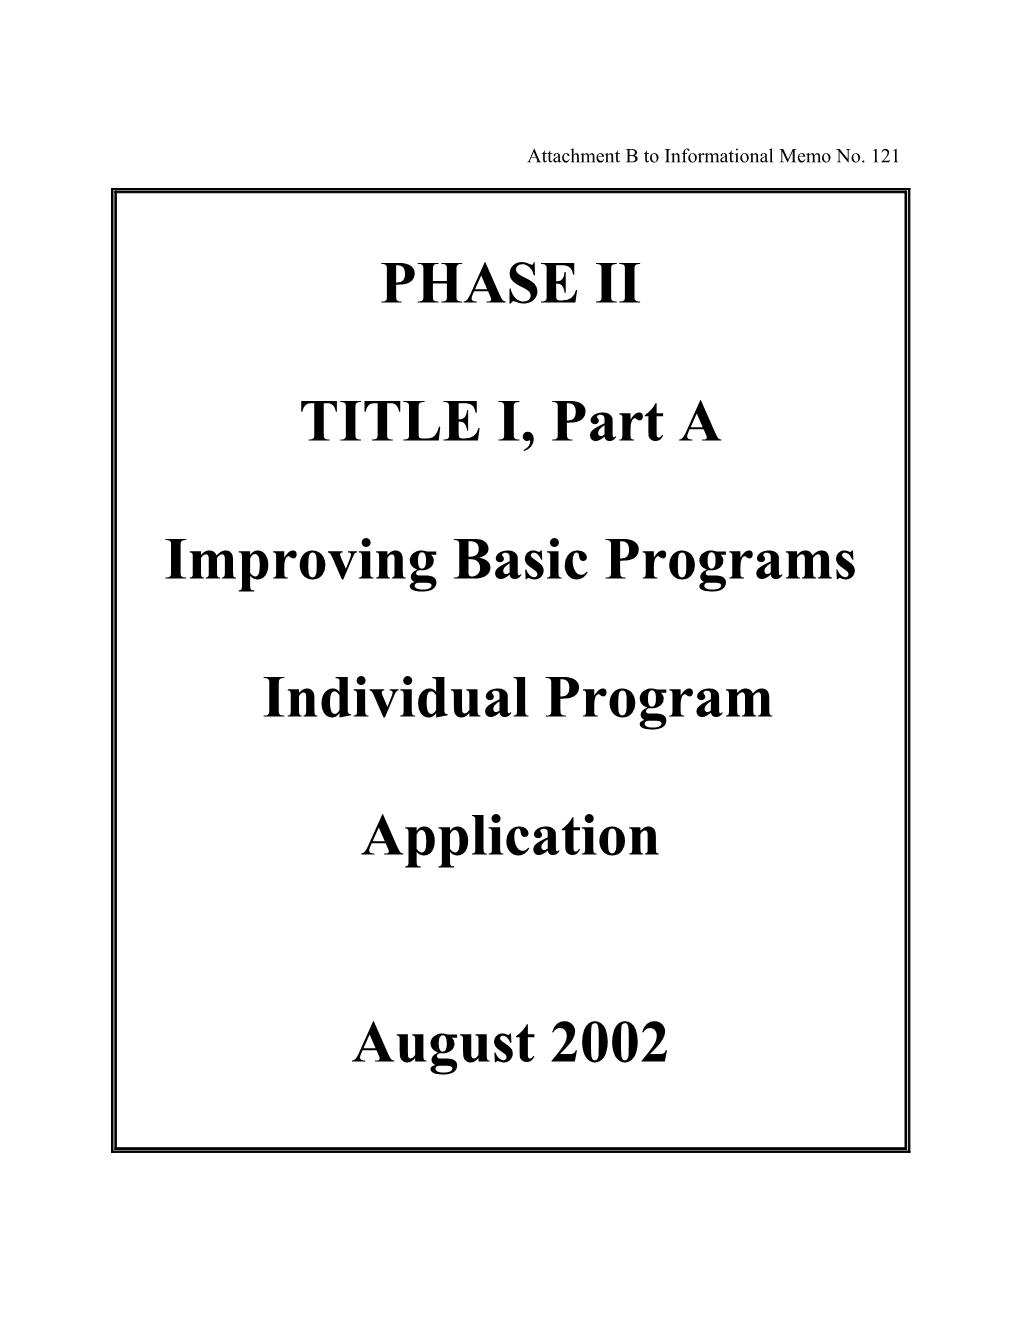 Instructions for Completion of Title I, Part A, Improving Basic Programs, Individual Program